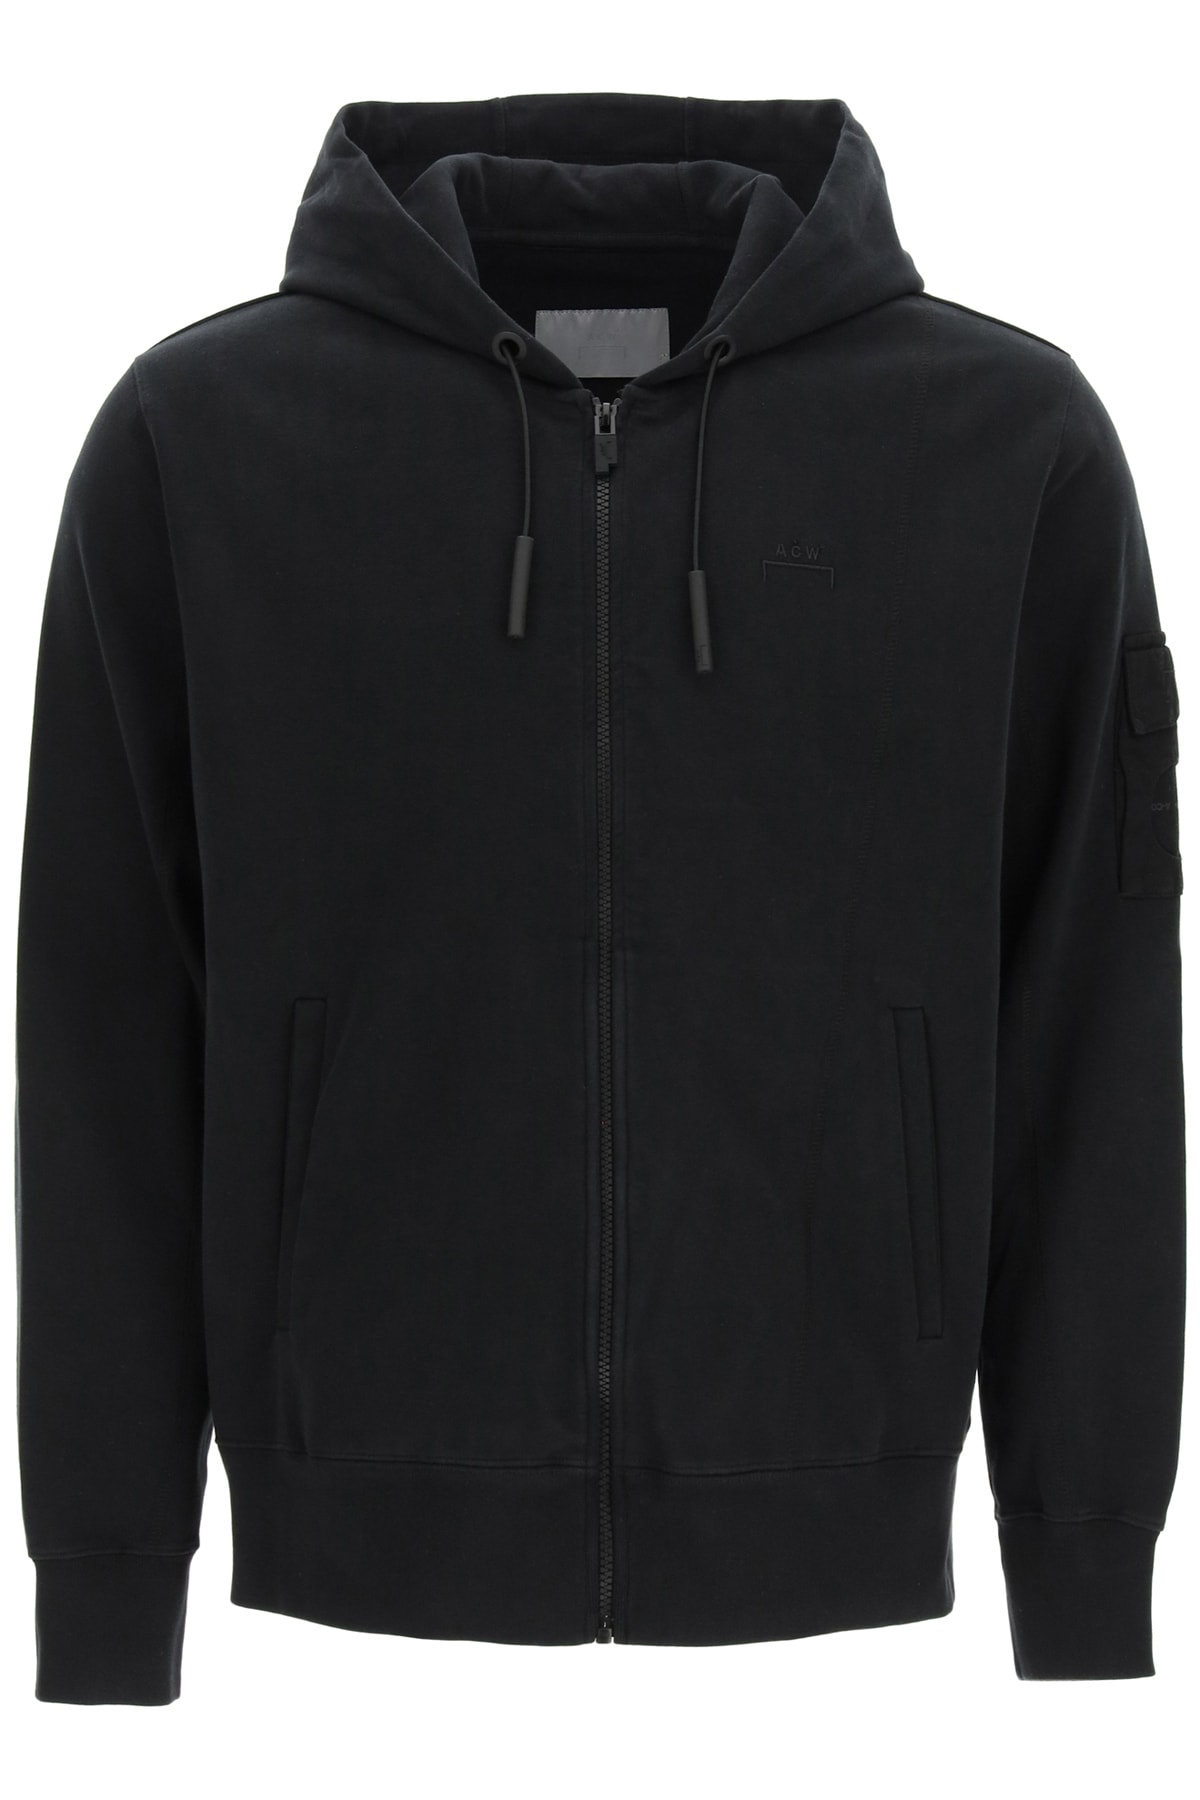 A-COLD-WALL* HOODIE WITH LOGO EMBROIDERY,ACWMW031 BLACK